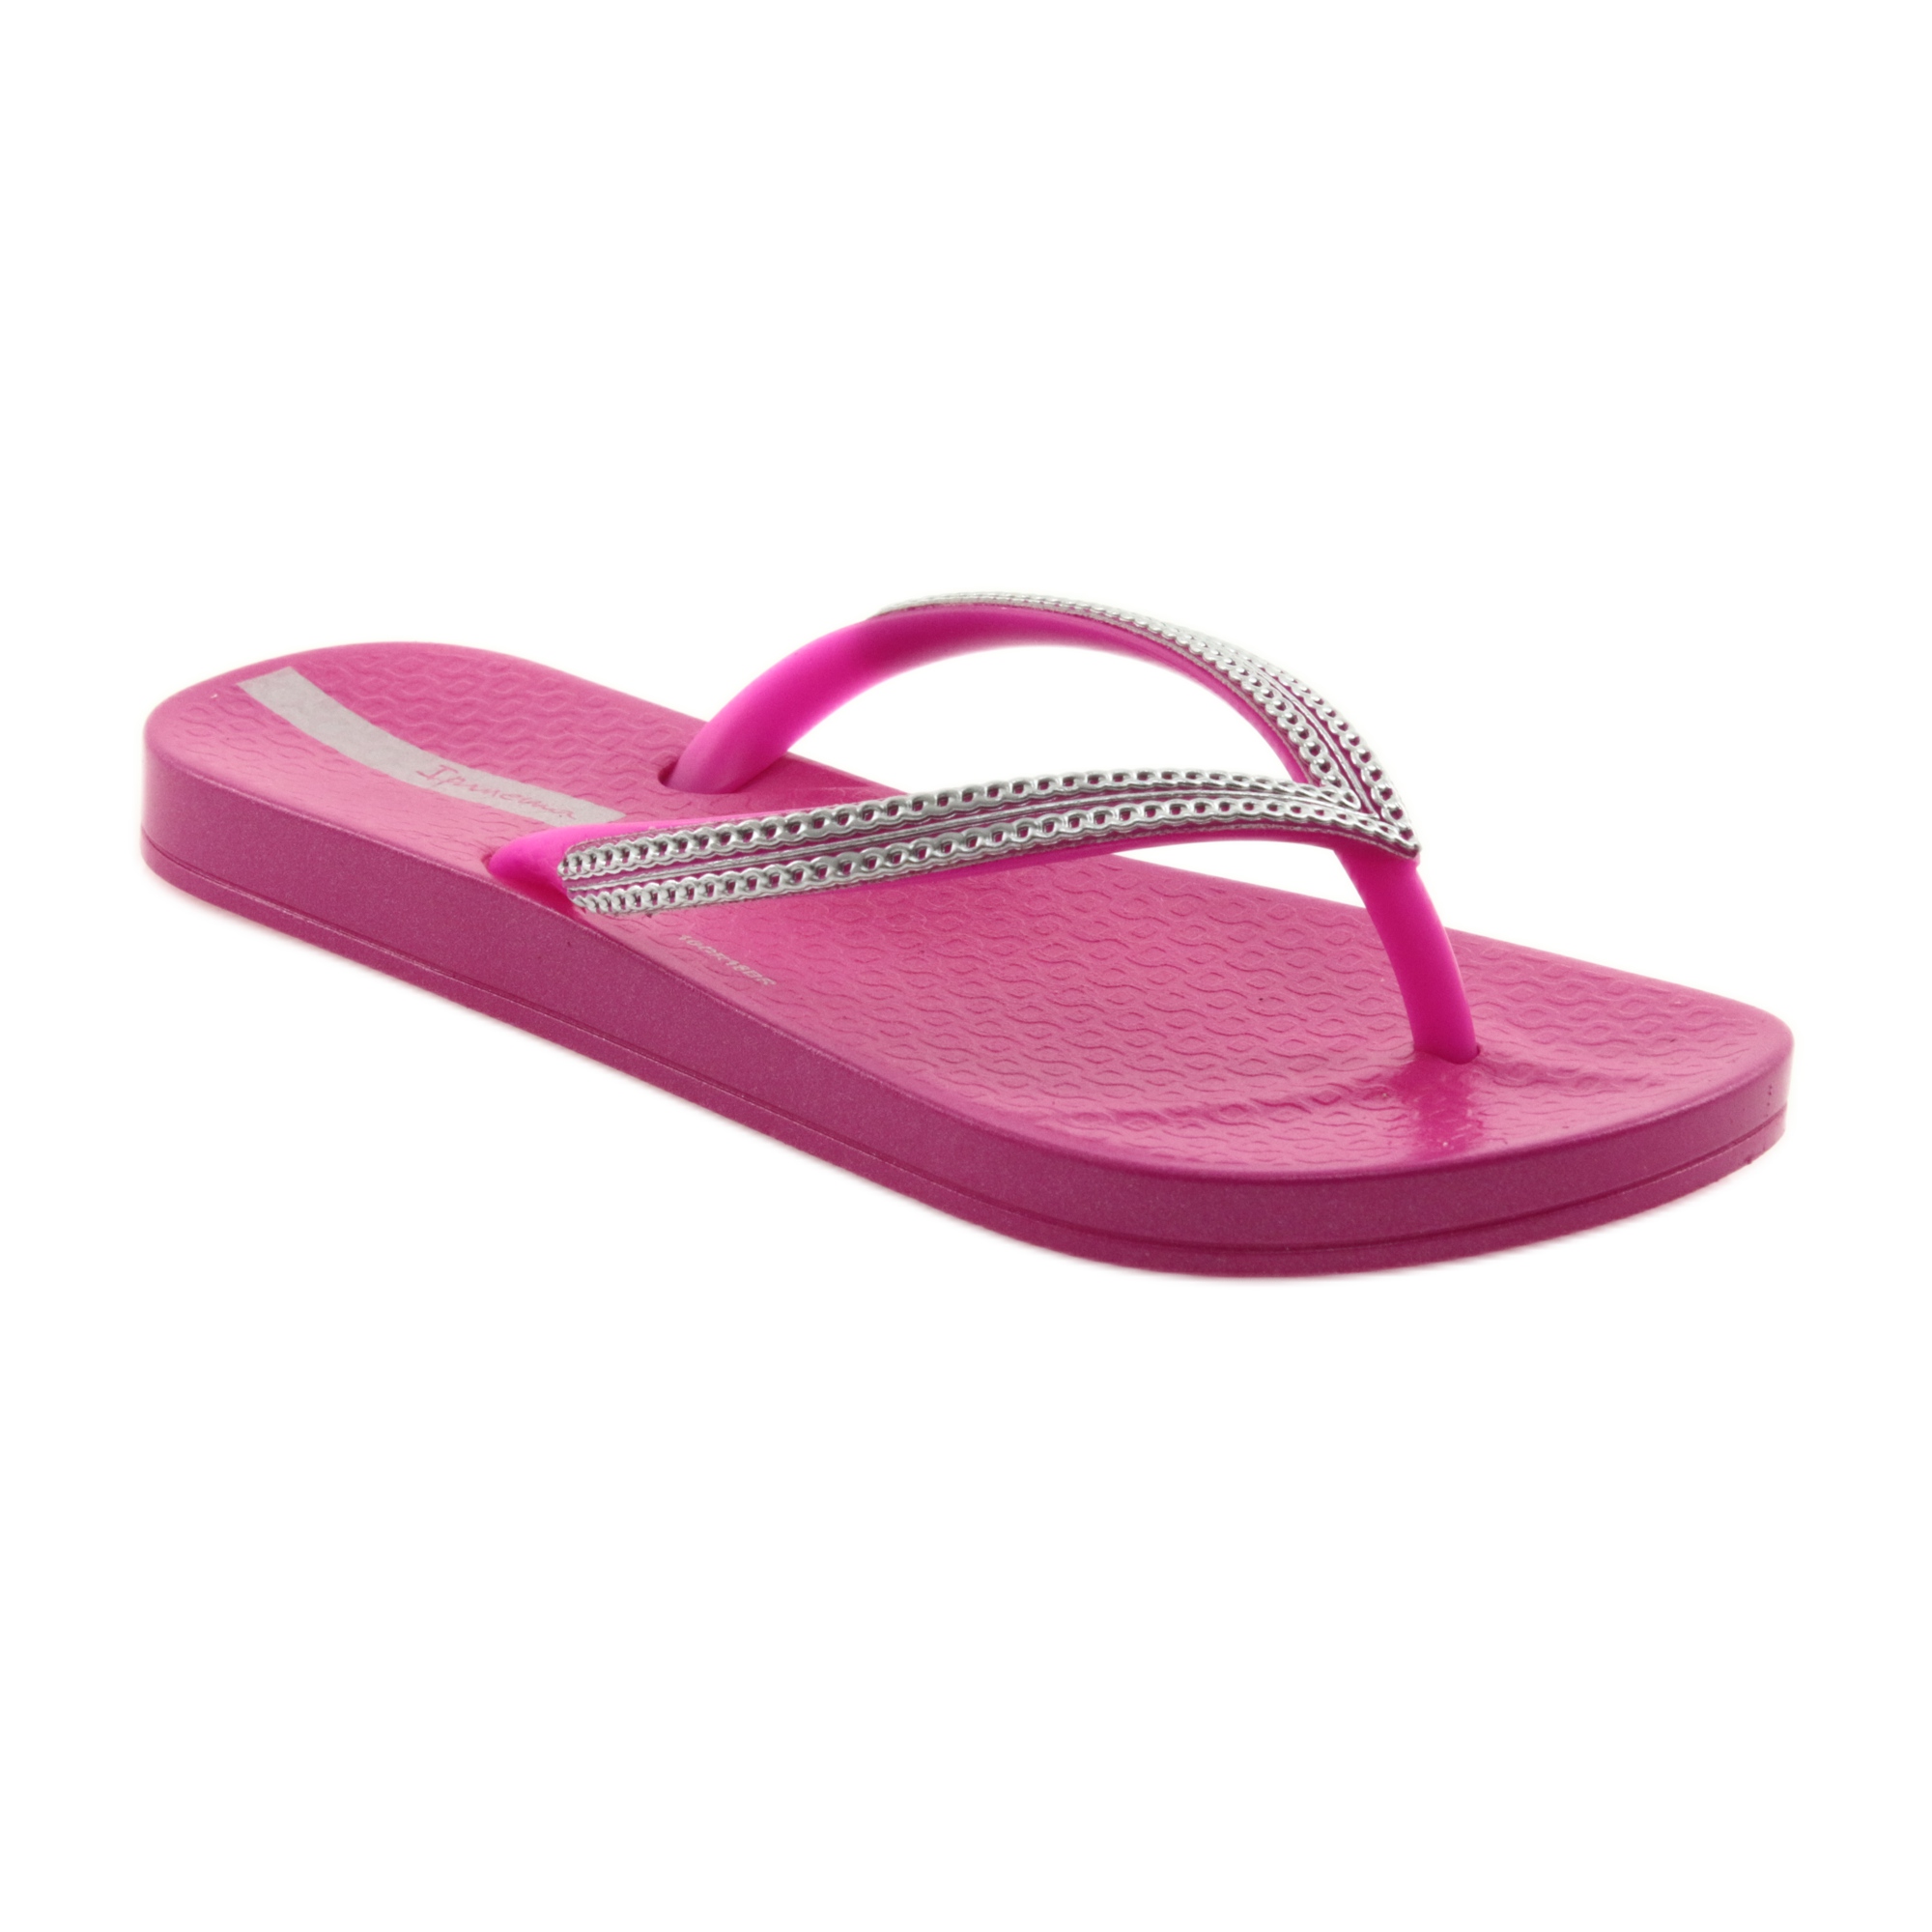 Silver flip-flops chains Ipanema 82528 pink grey KeeShoes